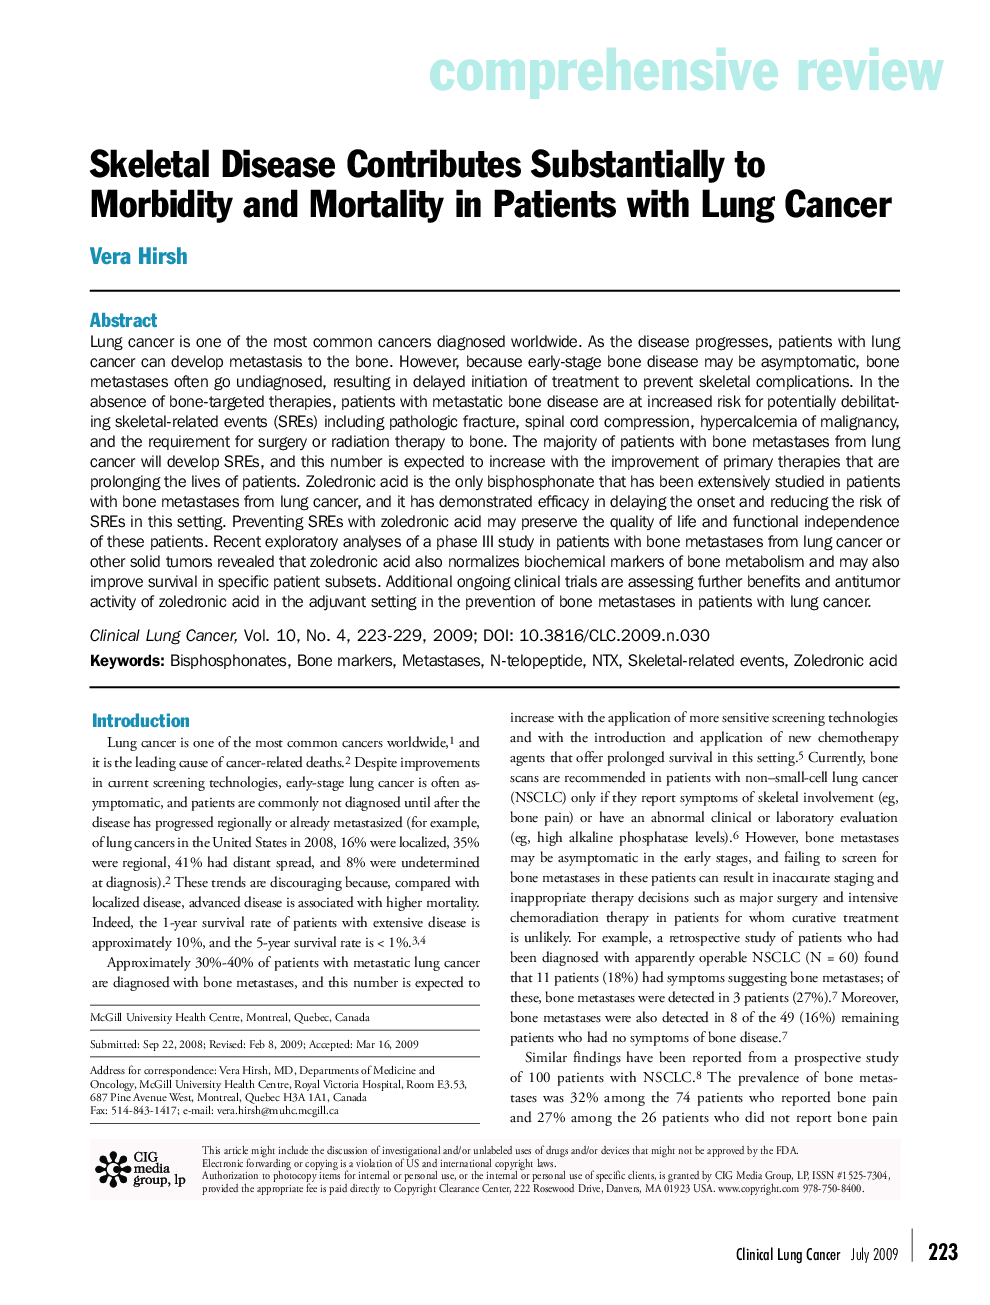 Skeletal Disease Contributes Substantially to Morbidity and Mortality in Patients with Lung Cancer 